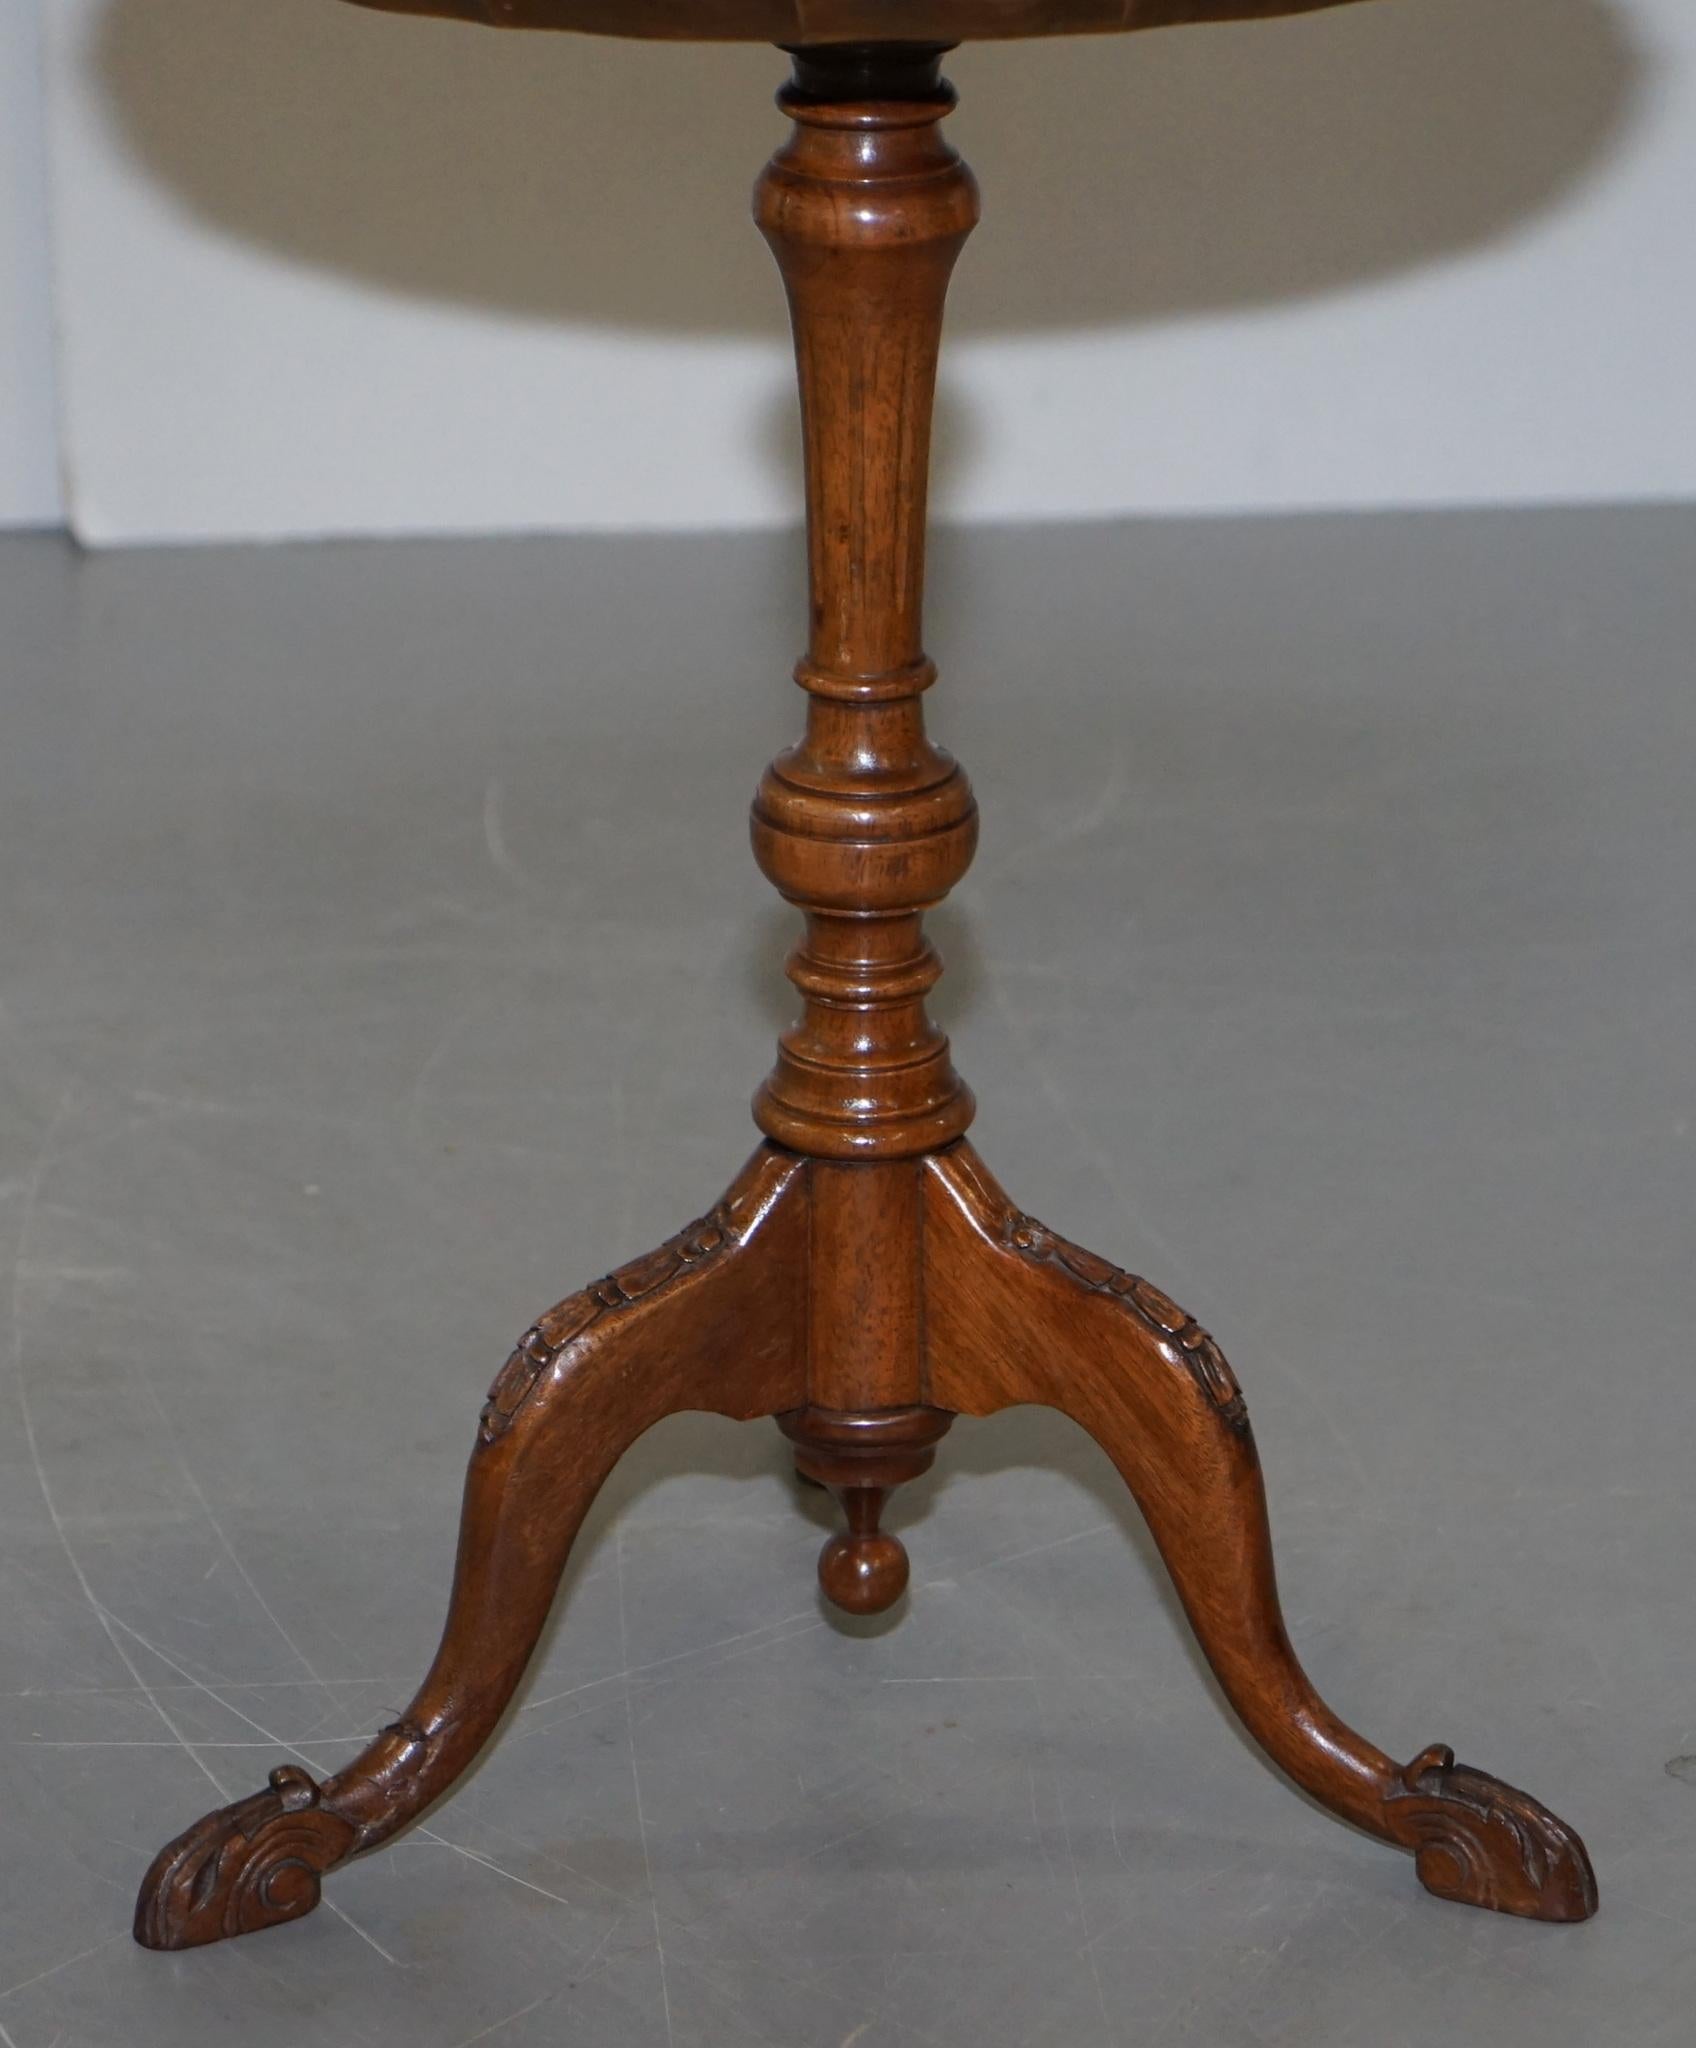 Hand-Crafted 19th Century Burr Walnut Tripod Side Table Victorian Ornate Carving Pie Crust For Sale